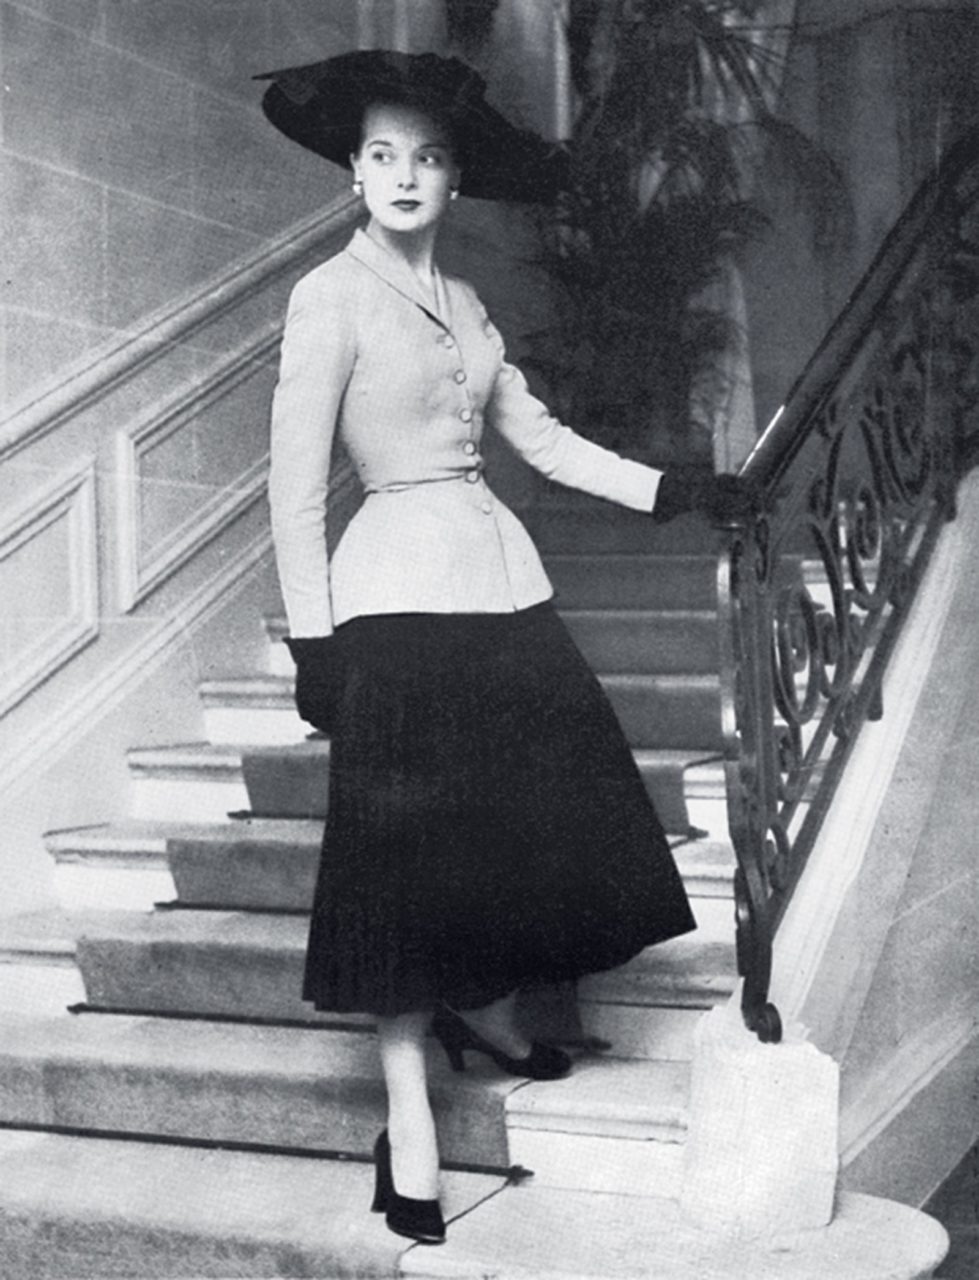 Spring 1947: The New Look (Bar Suit) by Christian Dior